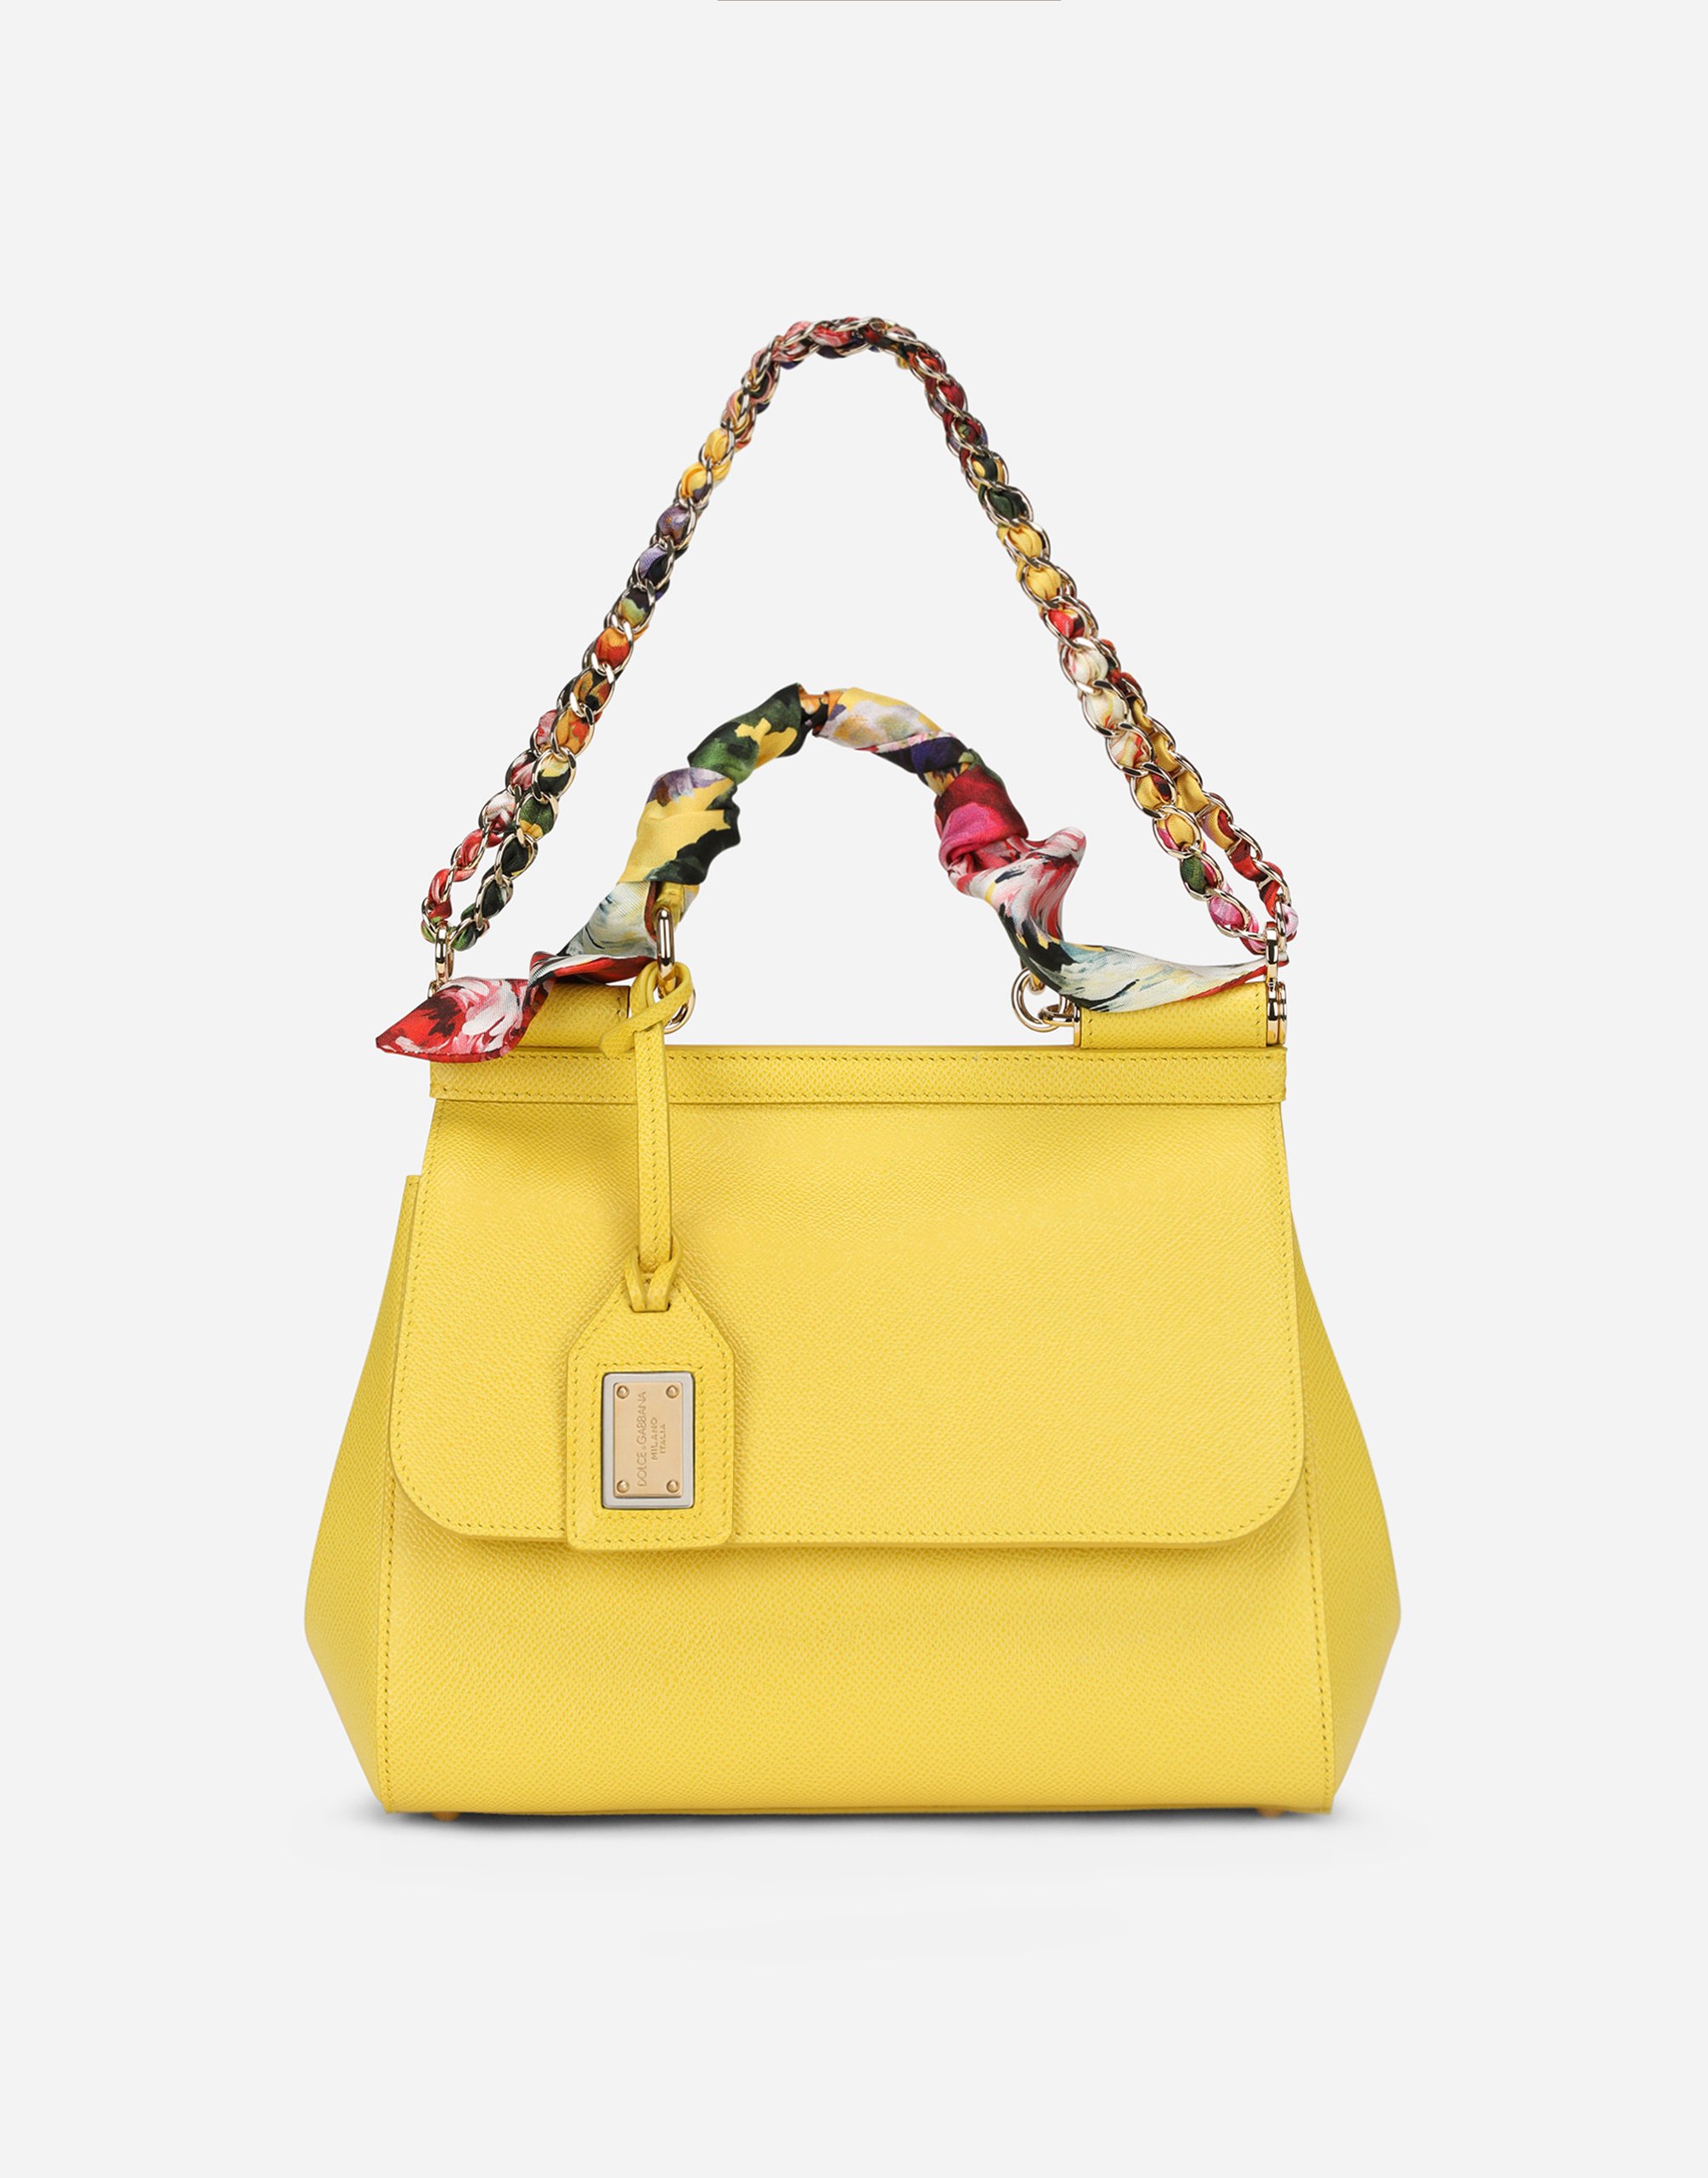 Medium Sicily bag in Dauphine calfskin with scarf in Yellow